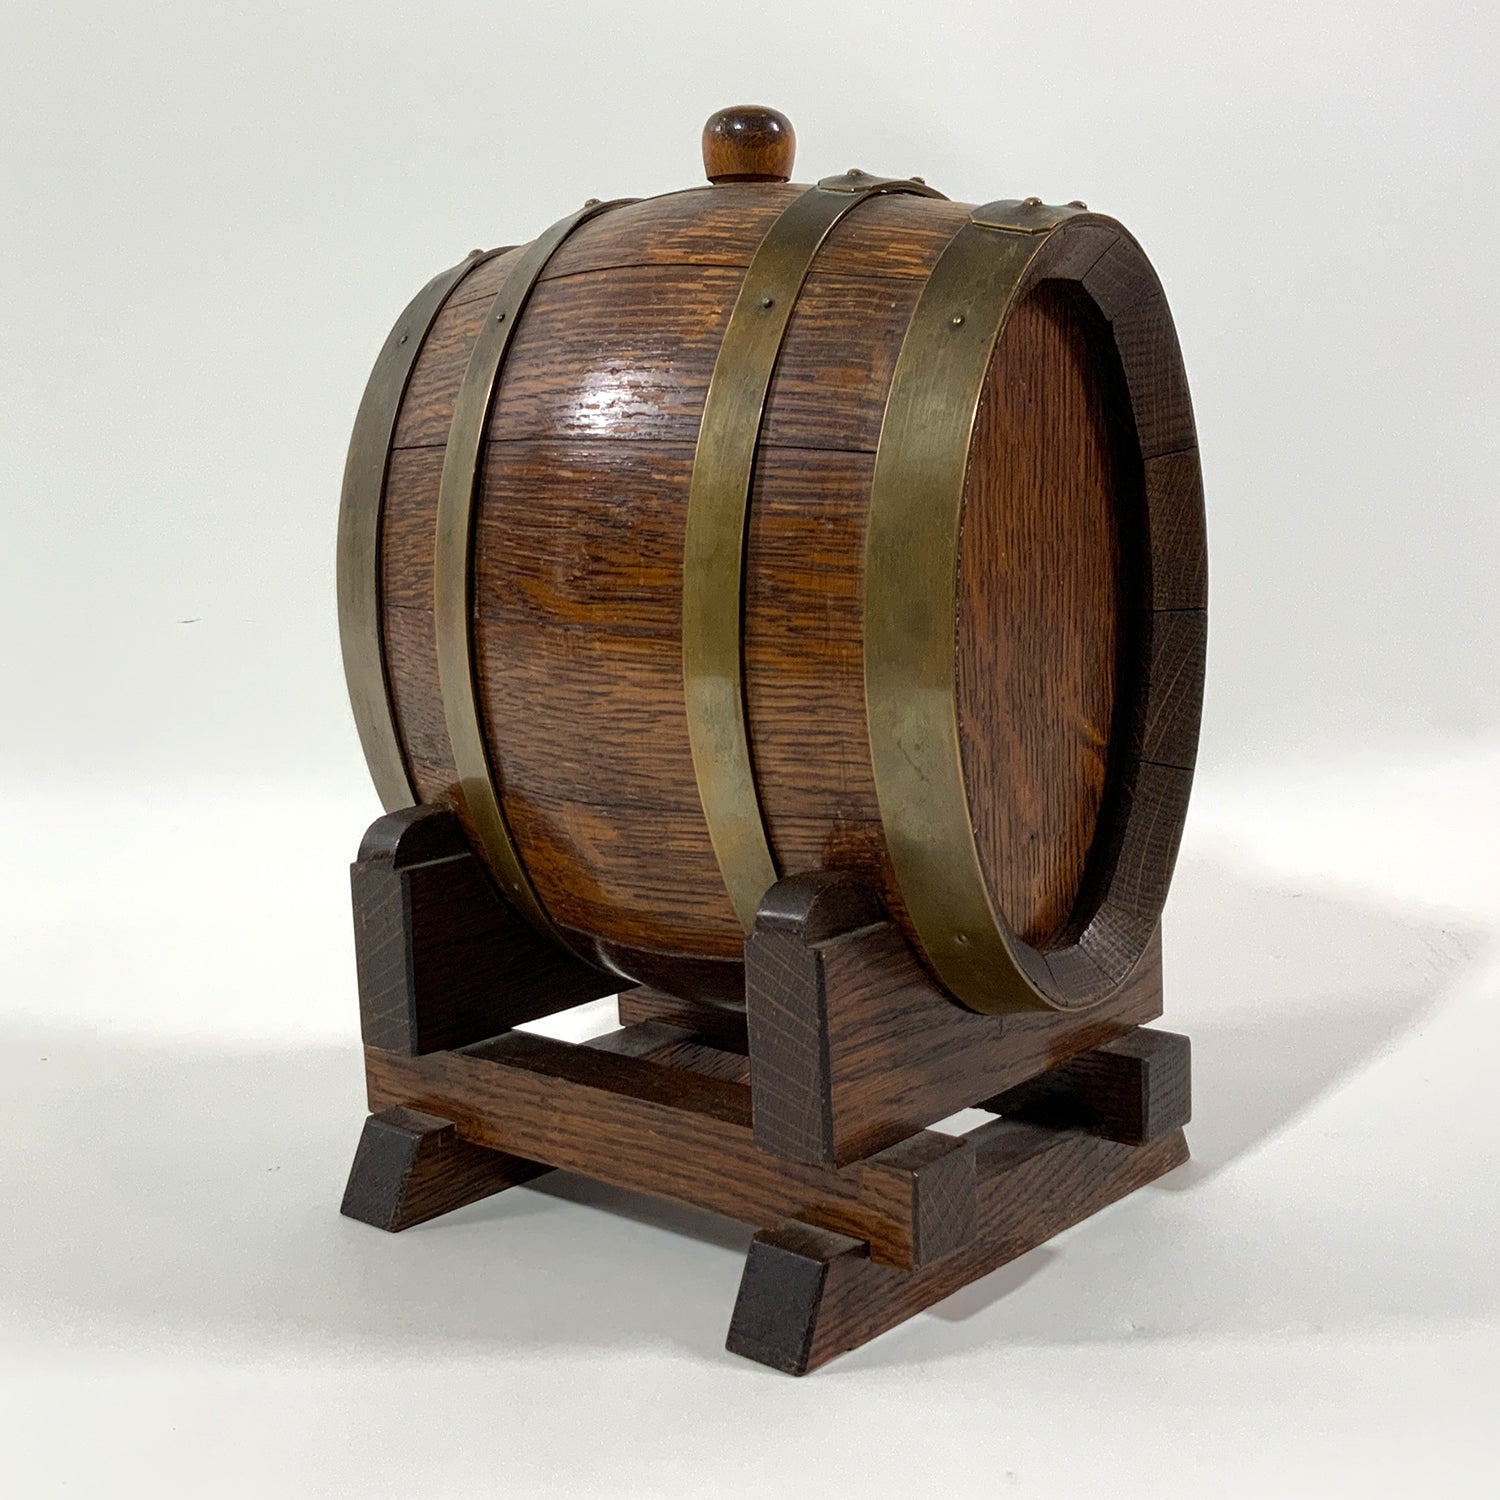 French Oak Cask On Stand For A. Giurlani + Bros. - Lannan Gallery